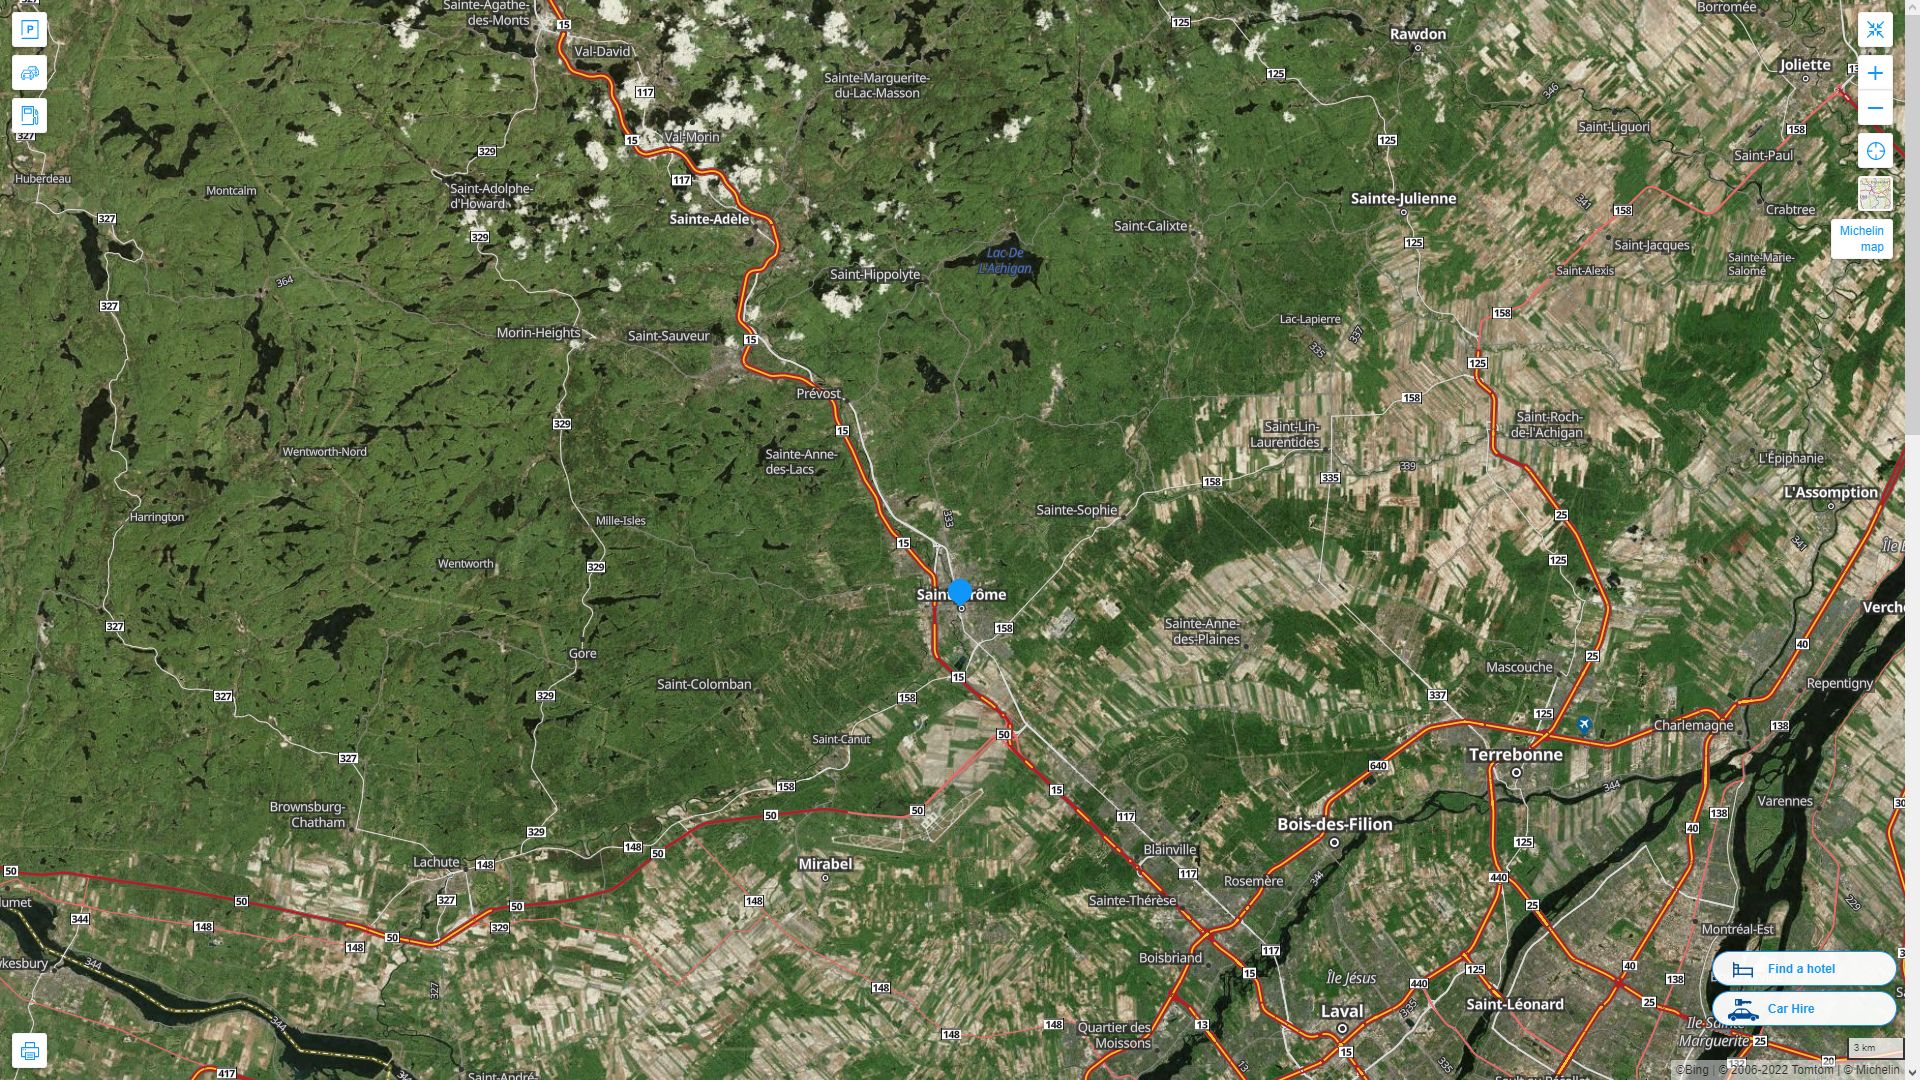 Saint Jerome Highway and Road Map with Satellite View